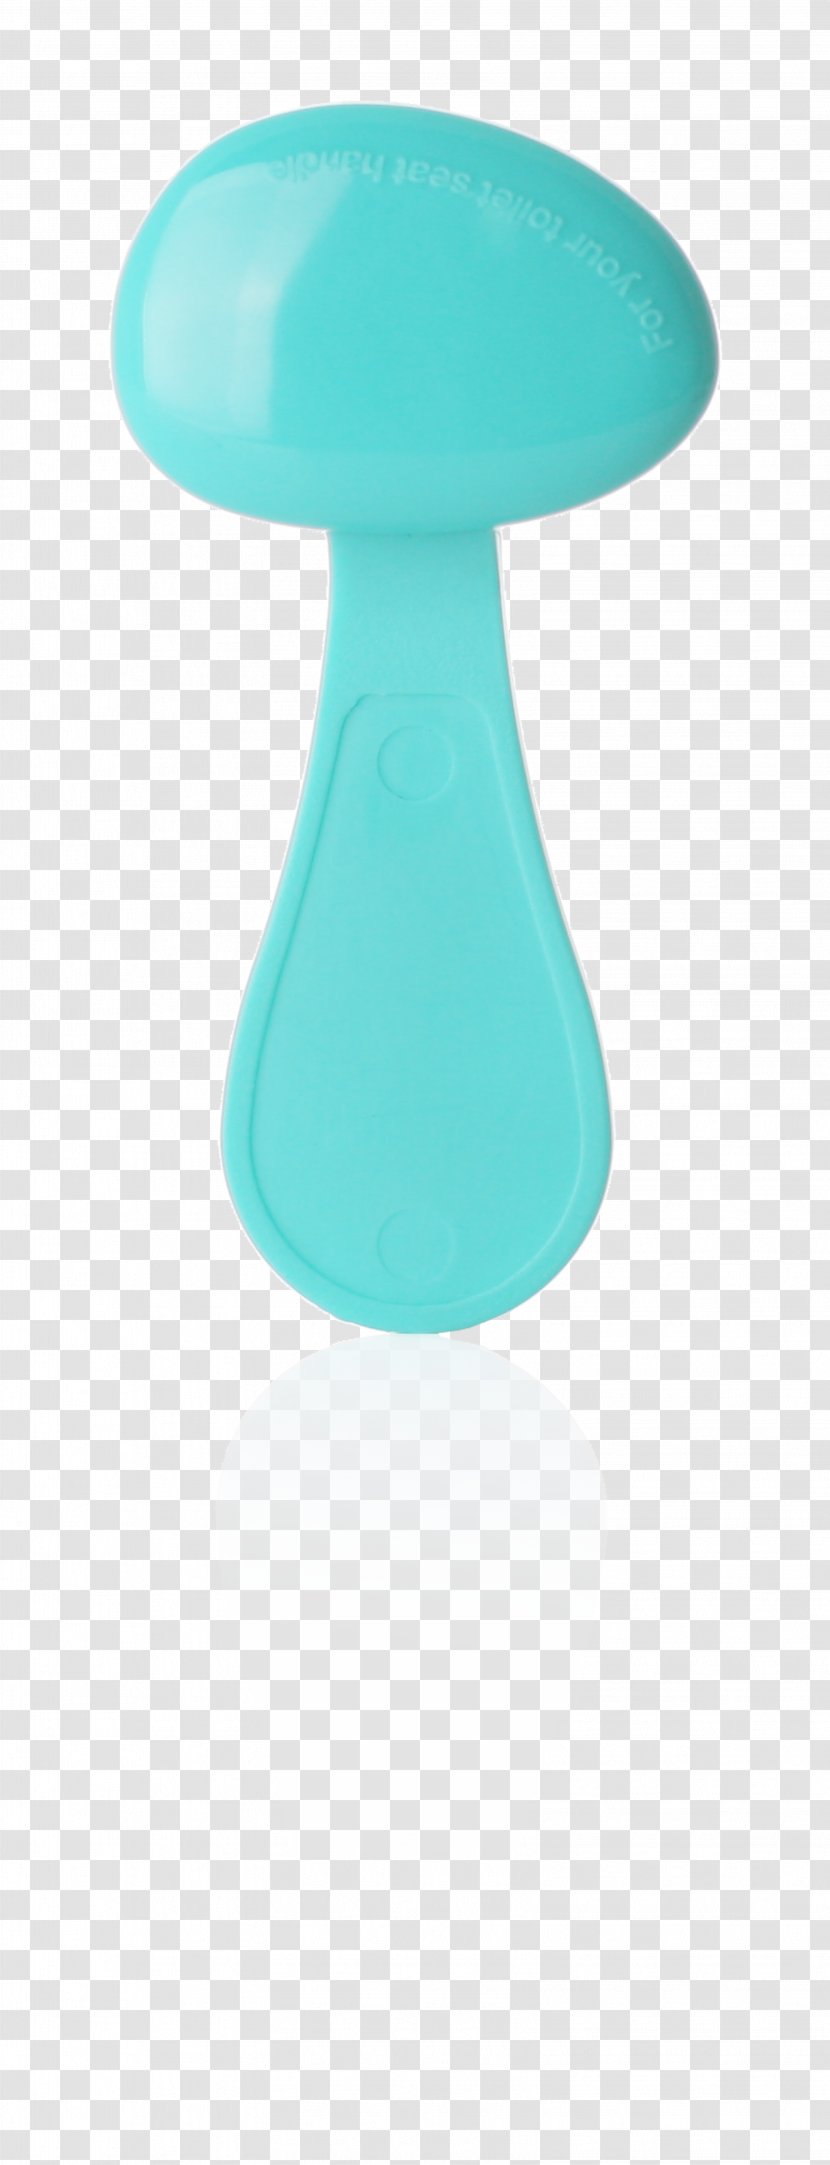 Turquoise - Table - Design Transparent PNG